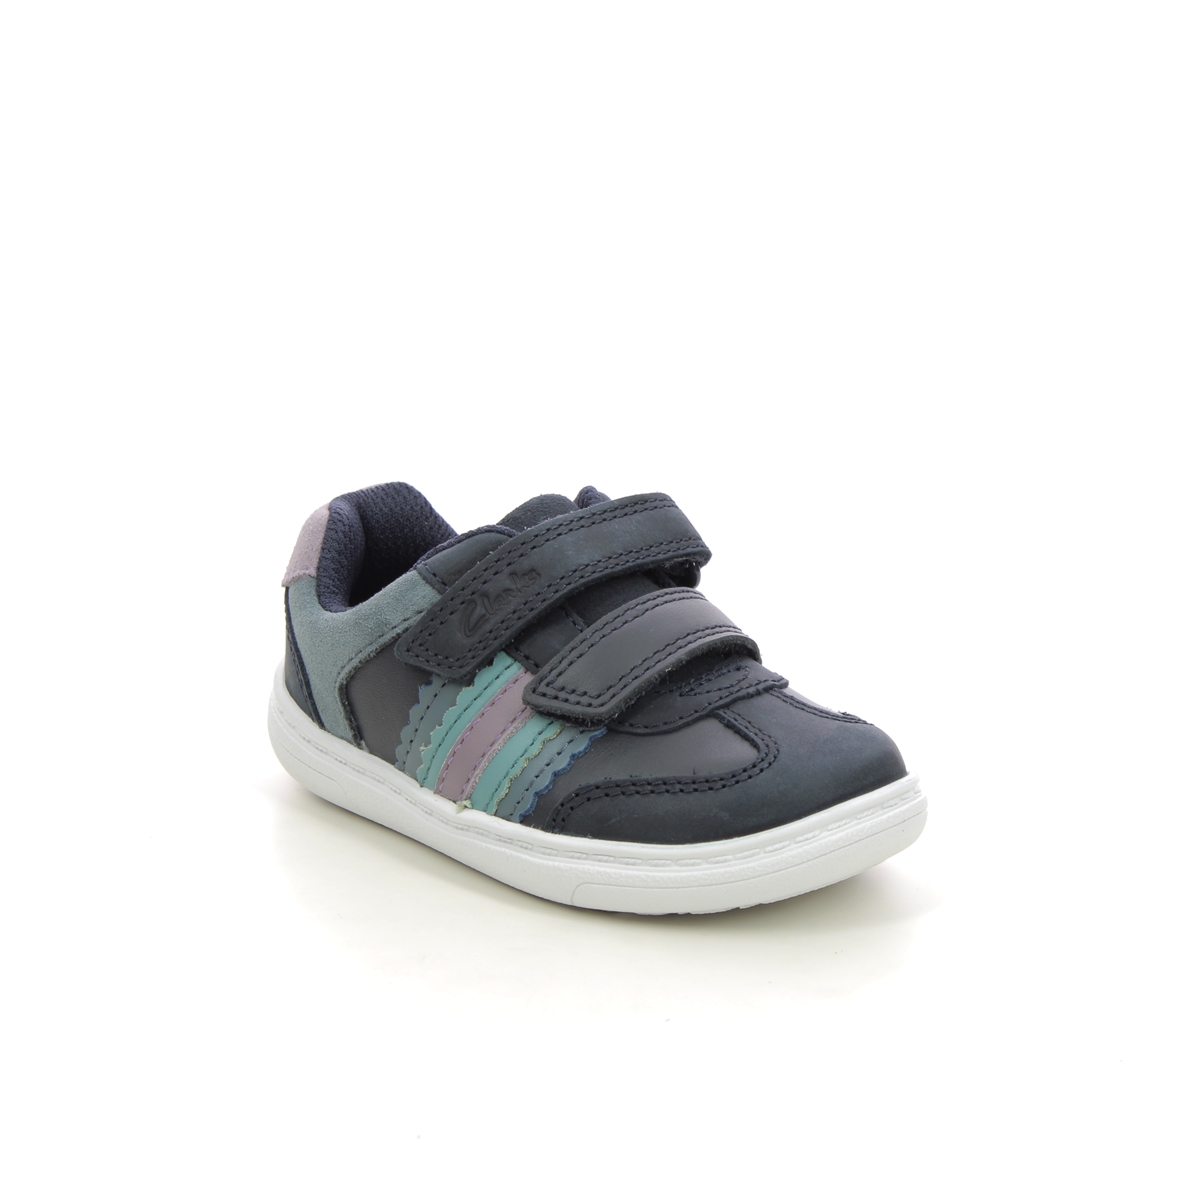 Clarks Flash Band T Navy Leather Kids First And Toddler 753956F In Size 6.5 In Plain Navy Leather F Width Fitting Regular Fit For kids